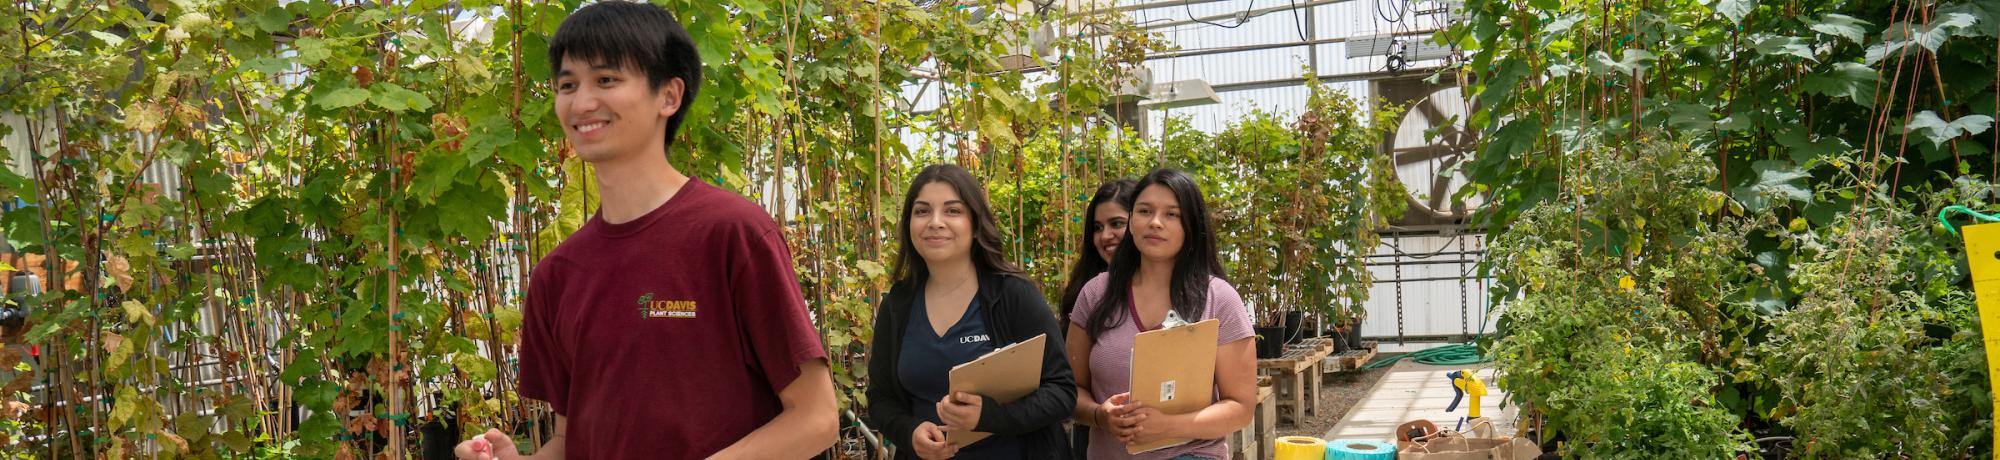 Students walk though greenhouse